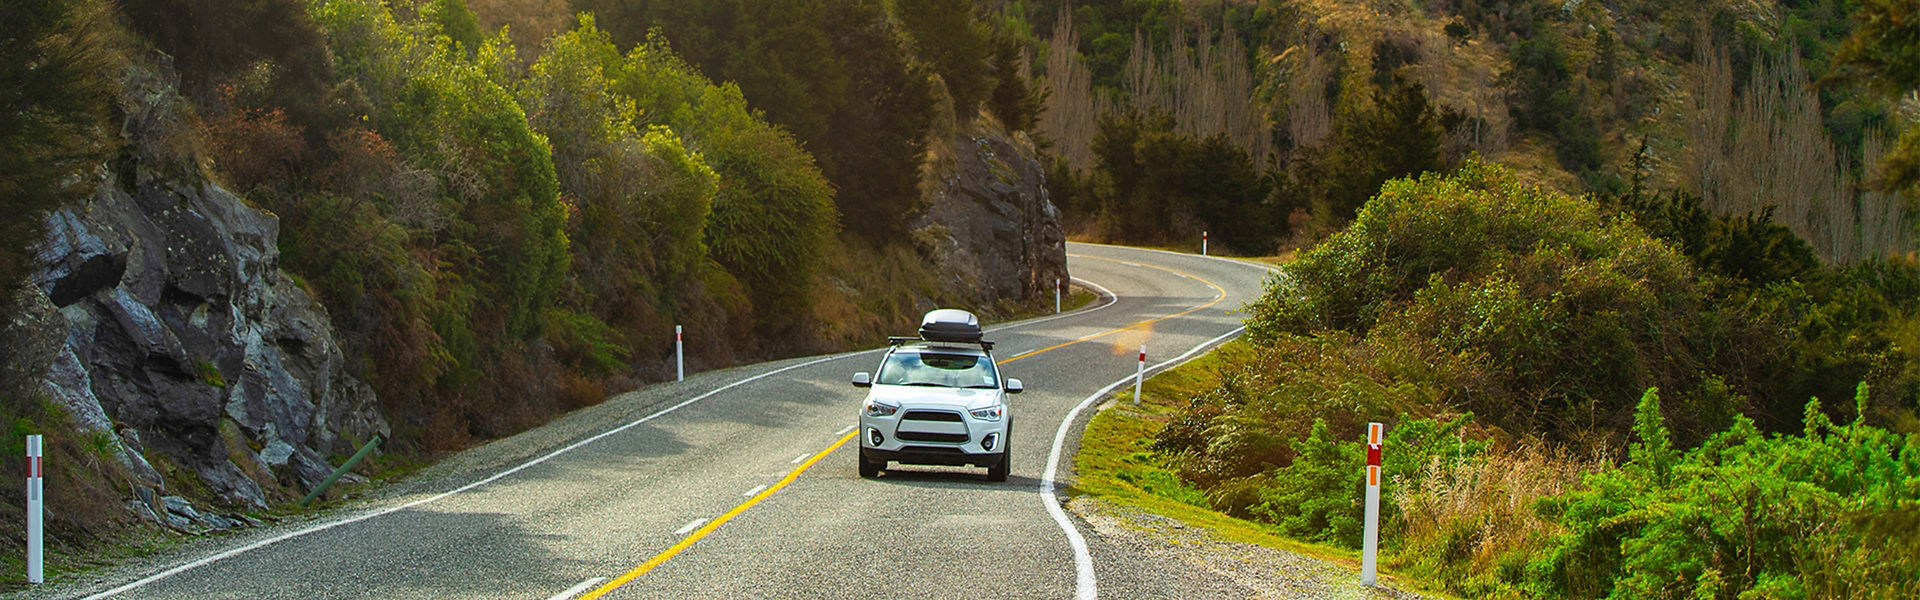 A white car driving on a scenic hilly road